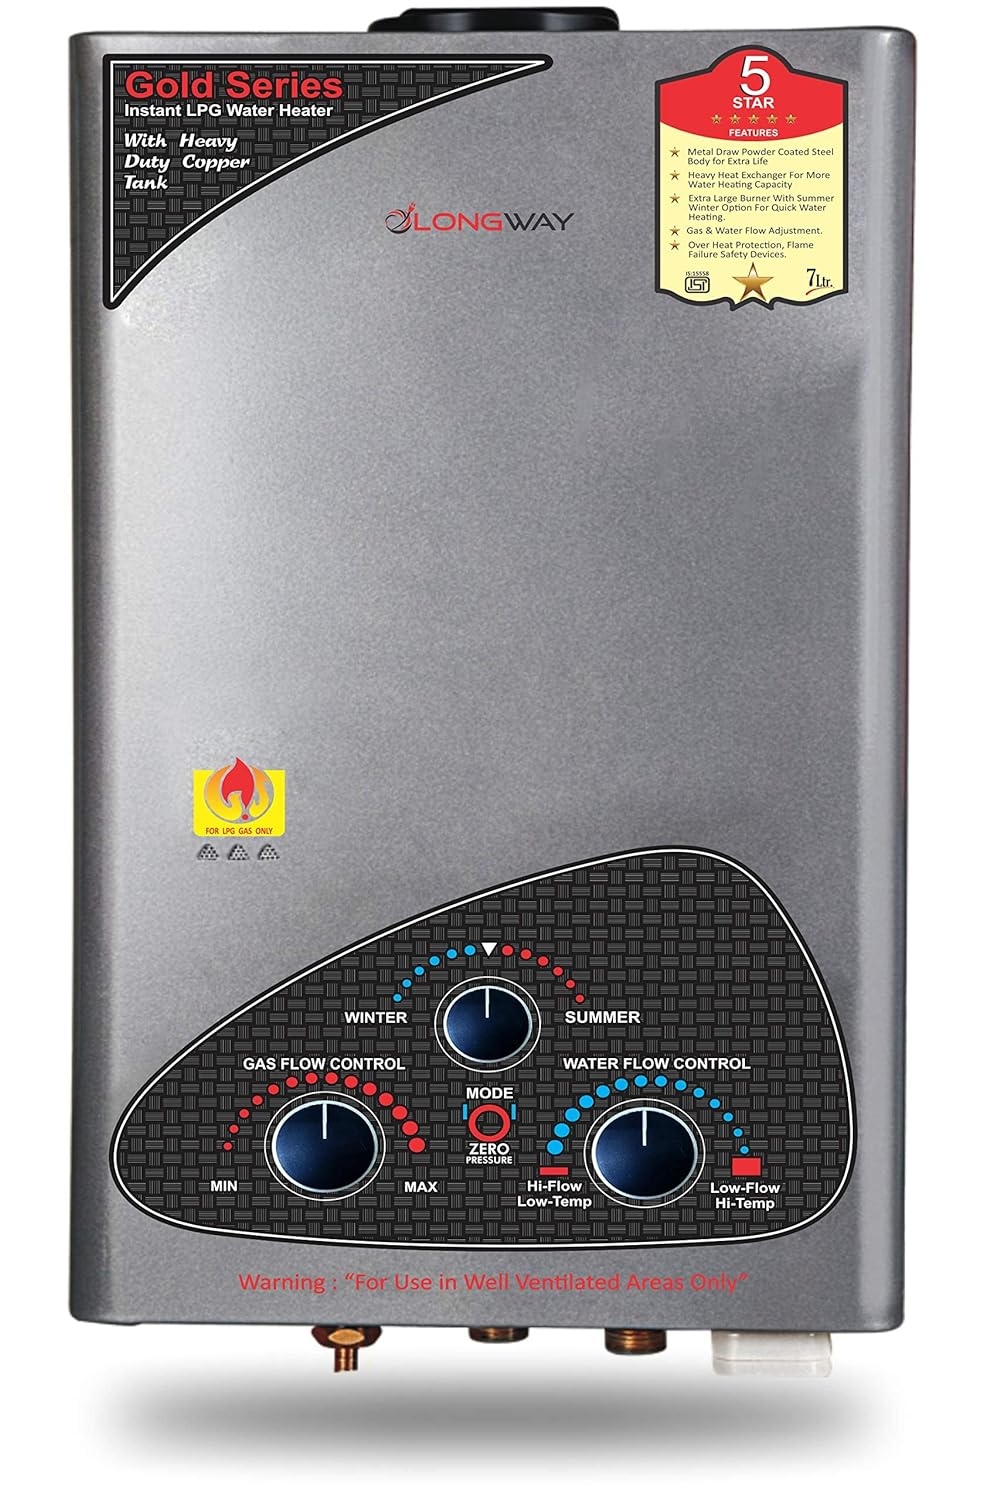 Longway Xolo Gold Dlx 7 ltr Automatic 5 Star Rated Gas Instant Water Heater with 2 Year Warranty